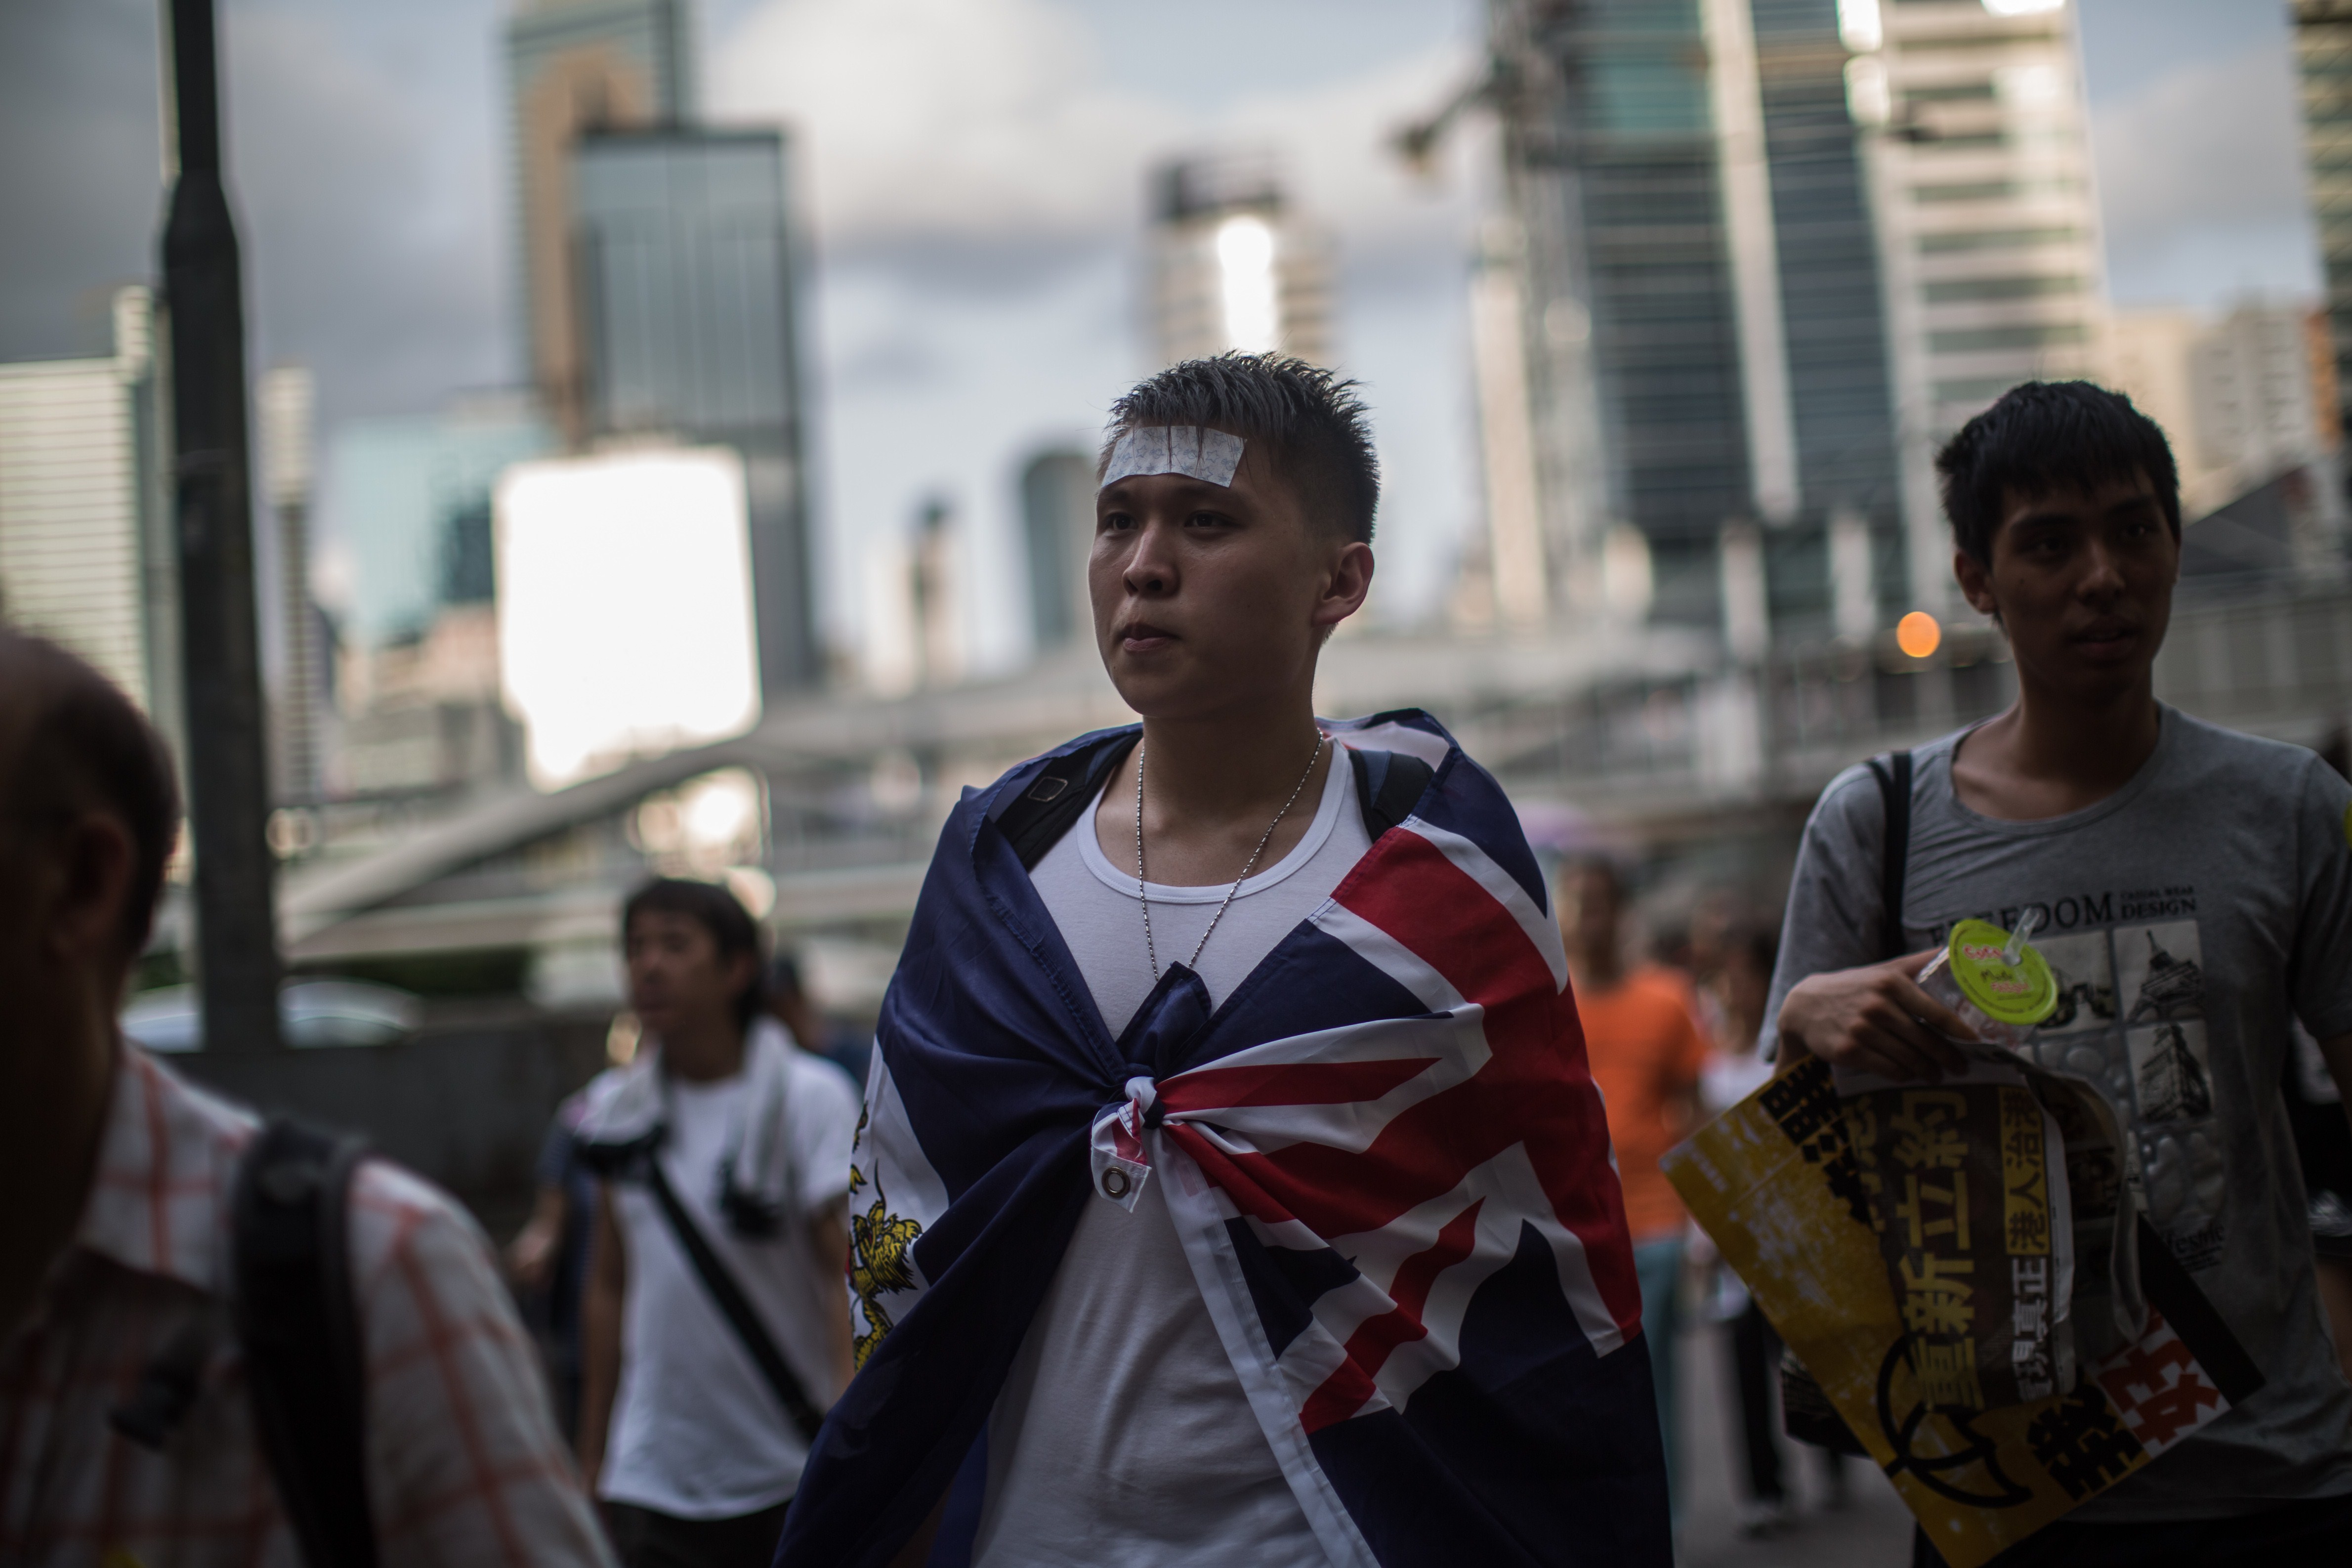 A protester wears the colonial Hong Kong flag around his shoulders as he attends a pro-democracy rally in Hong Kong on July 1, 2015 (Anthony Wallace—AFP/Getty Images)